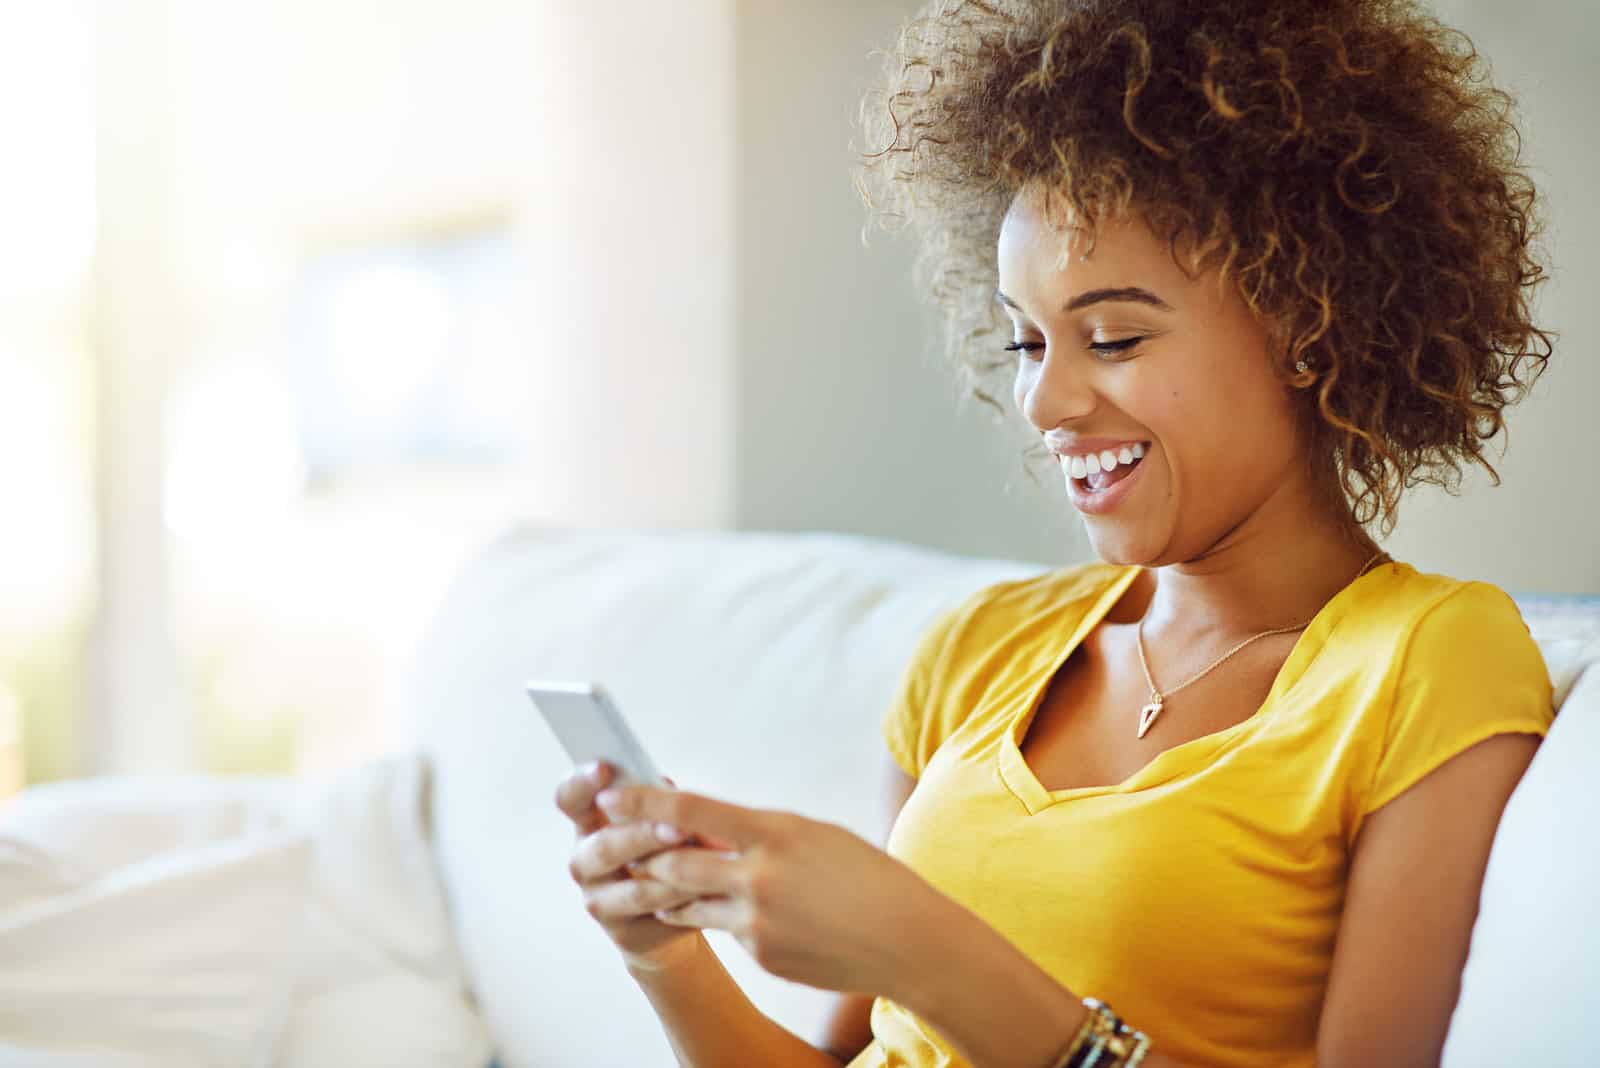 a smiling woman with frizzy hair sits and holds a mobile phone in her hand